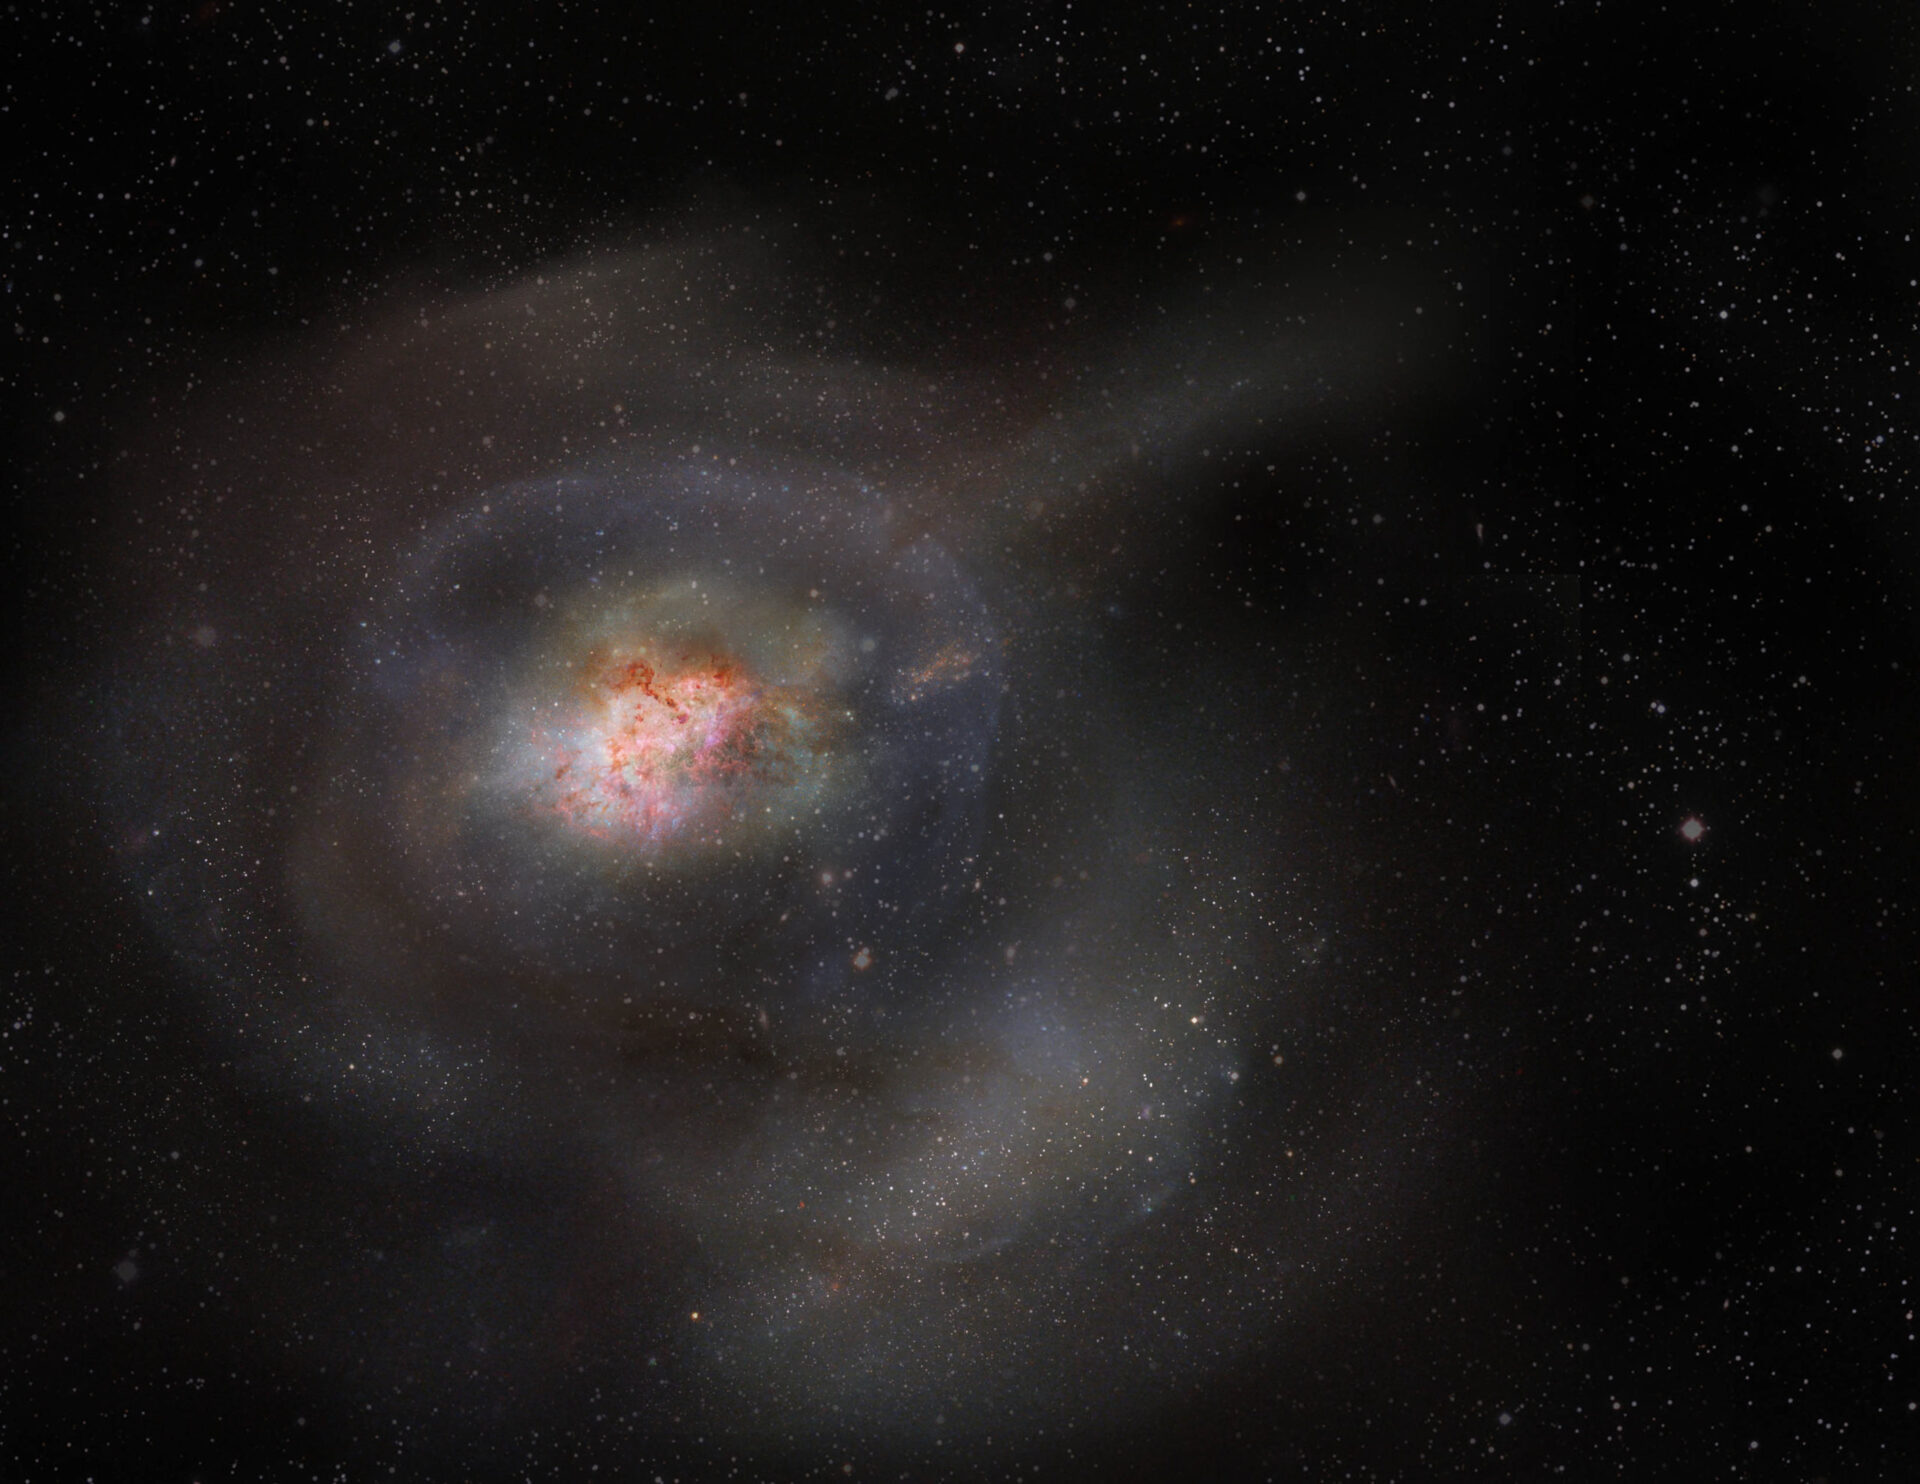 <p>Post-starburst galaxies, or PSBs, were previously thought to expel all of their gas in violent outbursts, leading to dormancy, a time when galaxies stop forming stars. But scientists using the Atacama Large Millimeter/submillimeter Array (ALMA) found that instead, PSBs condense and hold onto this turbulent gas, and then don't use it to form stars. This artist's impression highlights the compactness of molecular gas in a PSB and its lack of star formation. Credit: ALMA (ESO/NAOJ/NRAO)/S. Dagnello (NRAO/AUI/NSF)</p>
